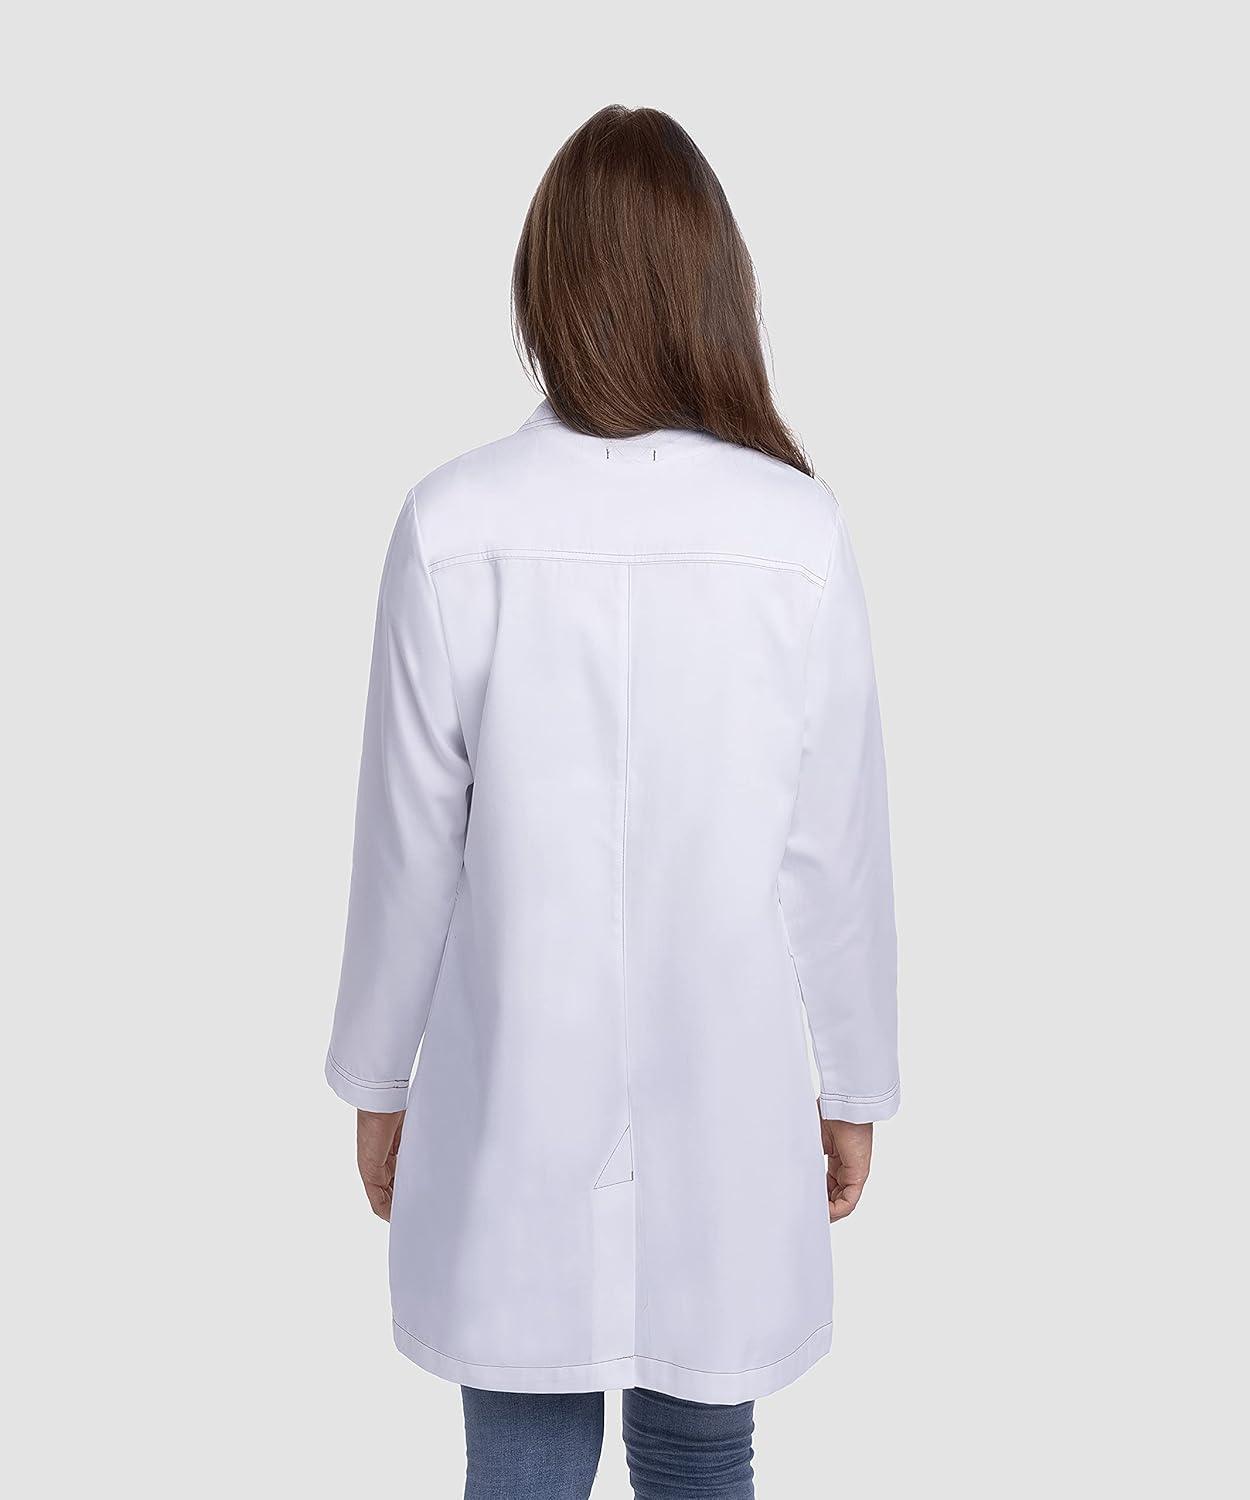 Dr. James Lab Coat for all Body Types 34 Inch Length Size M White - Massive Discounts